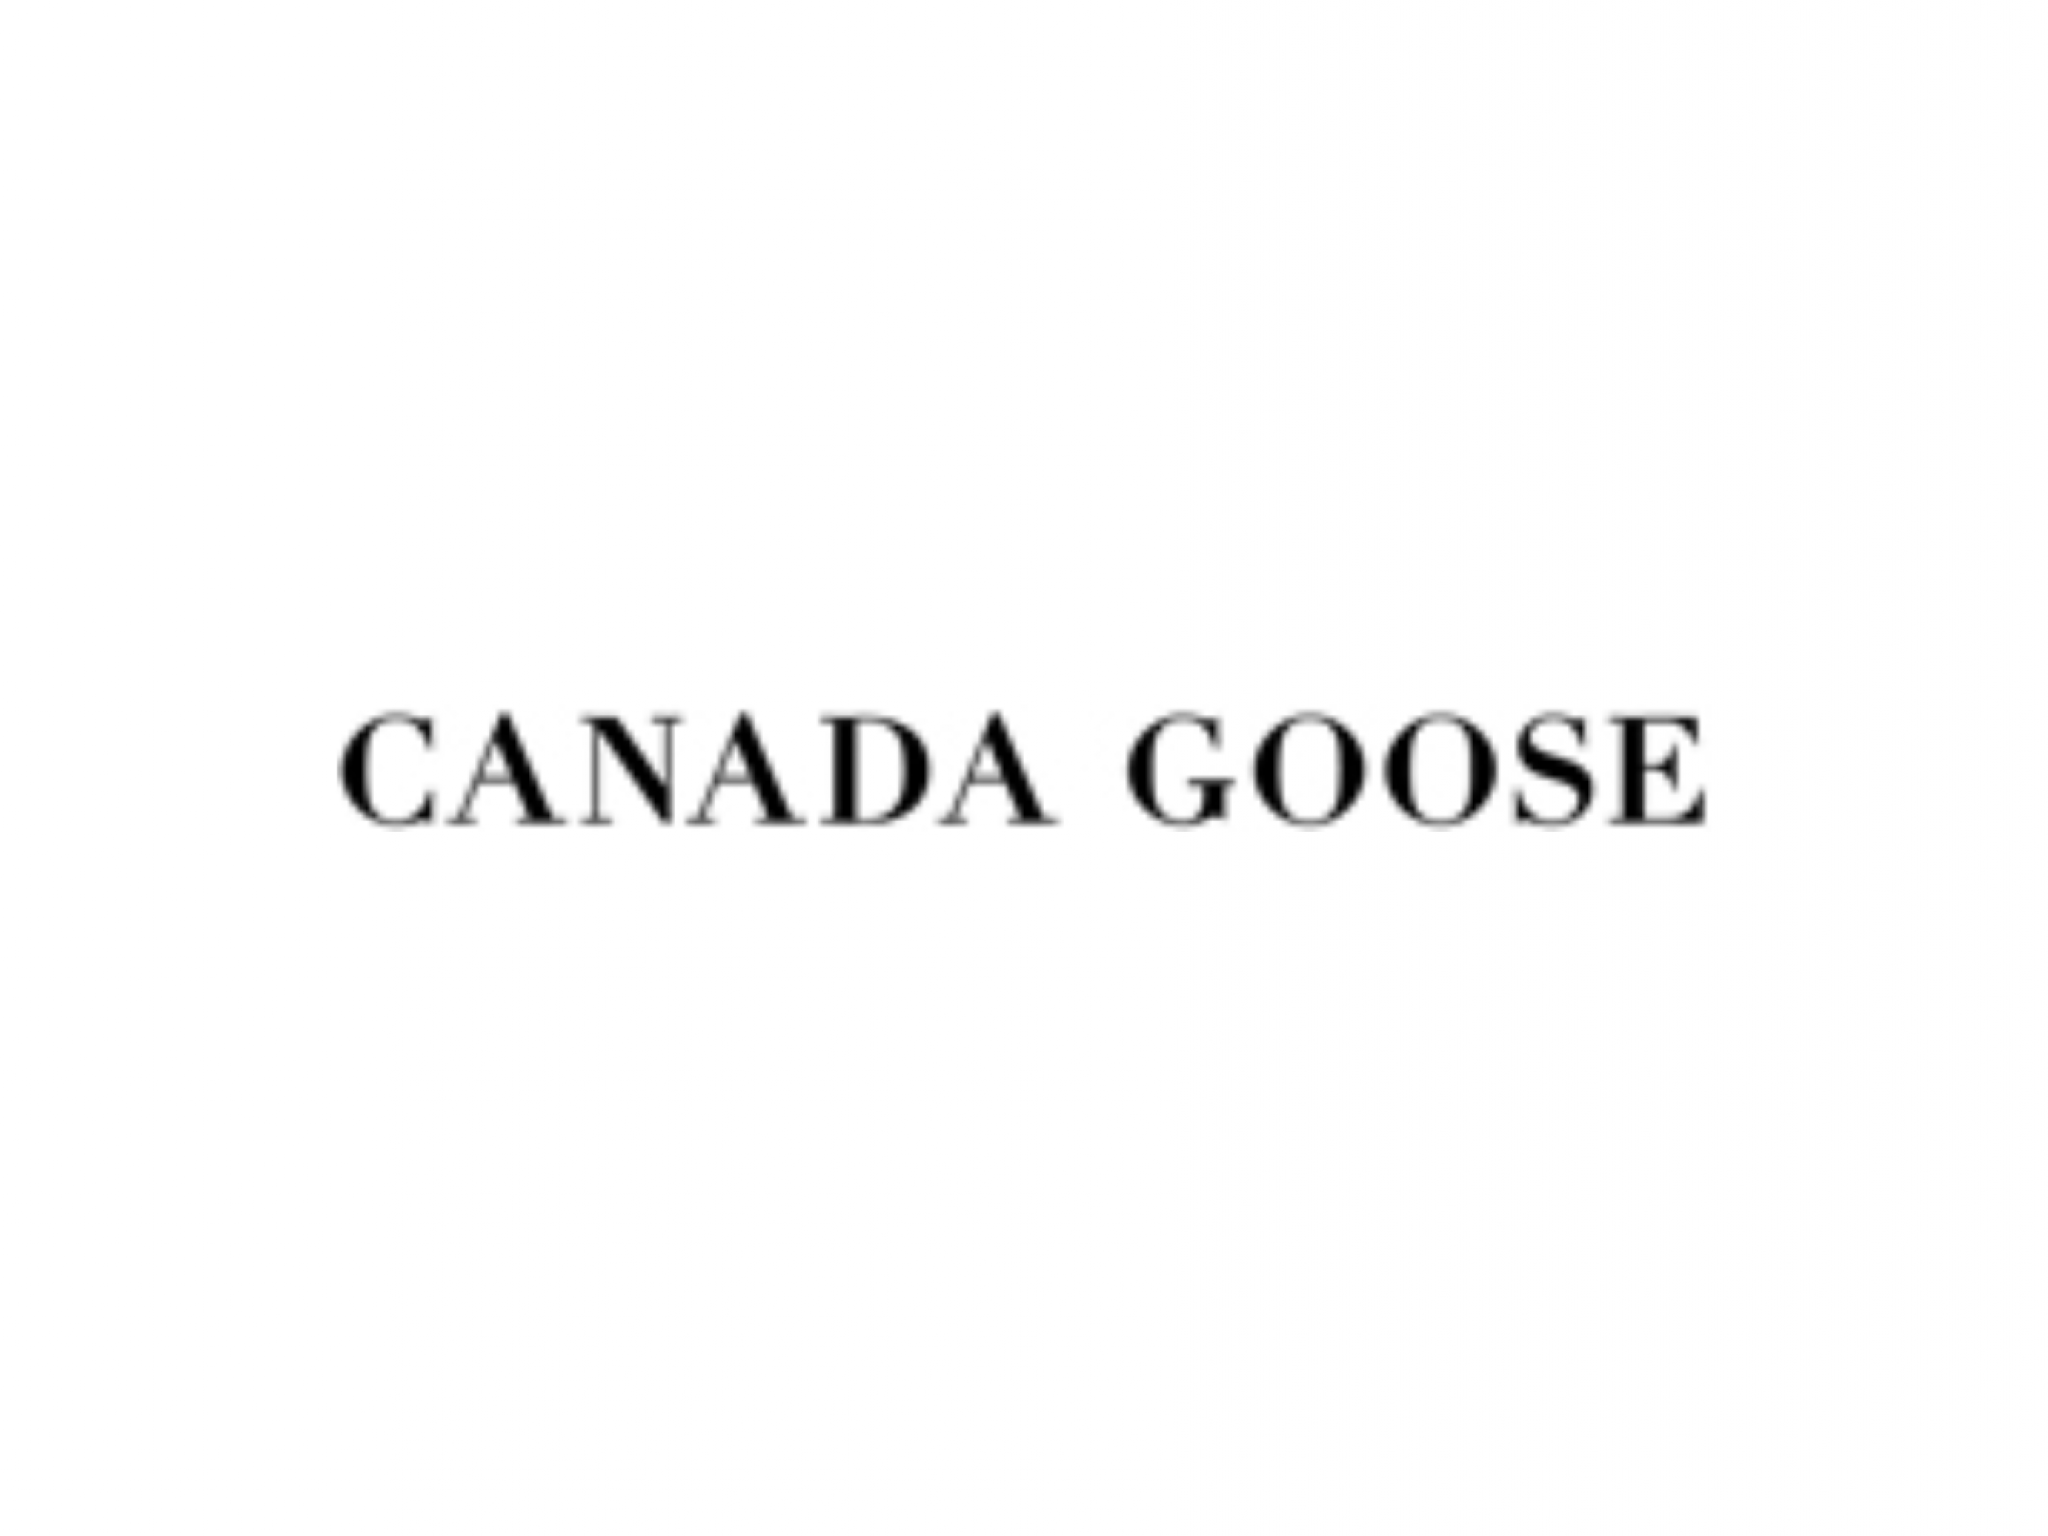  boosting-in-house-expertise-canada-goose-acquires-romanian-partner-to-enhance-knitwear-production 